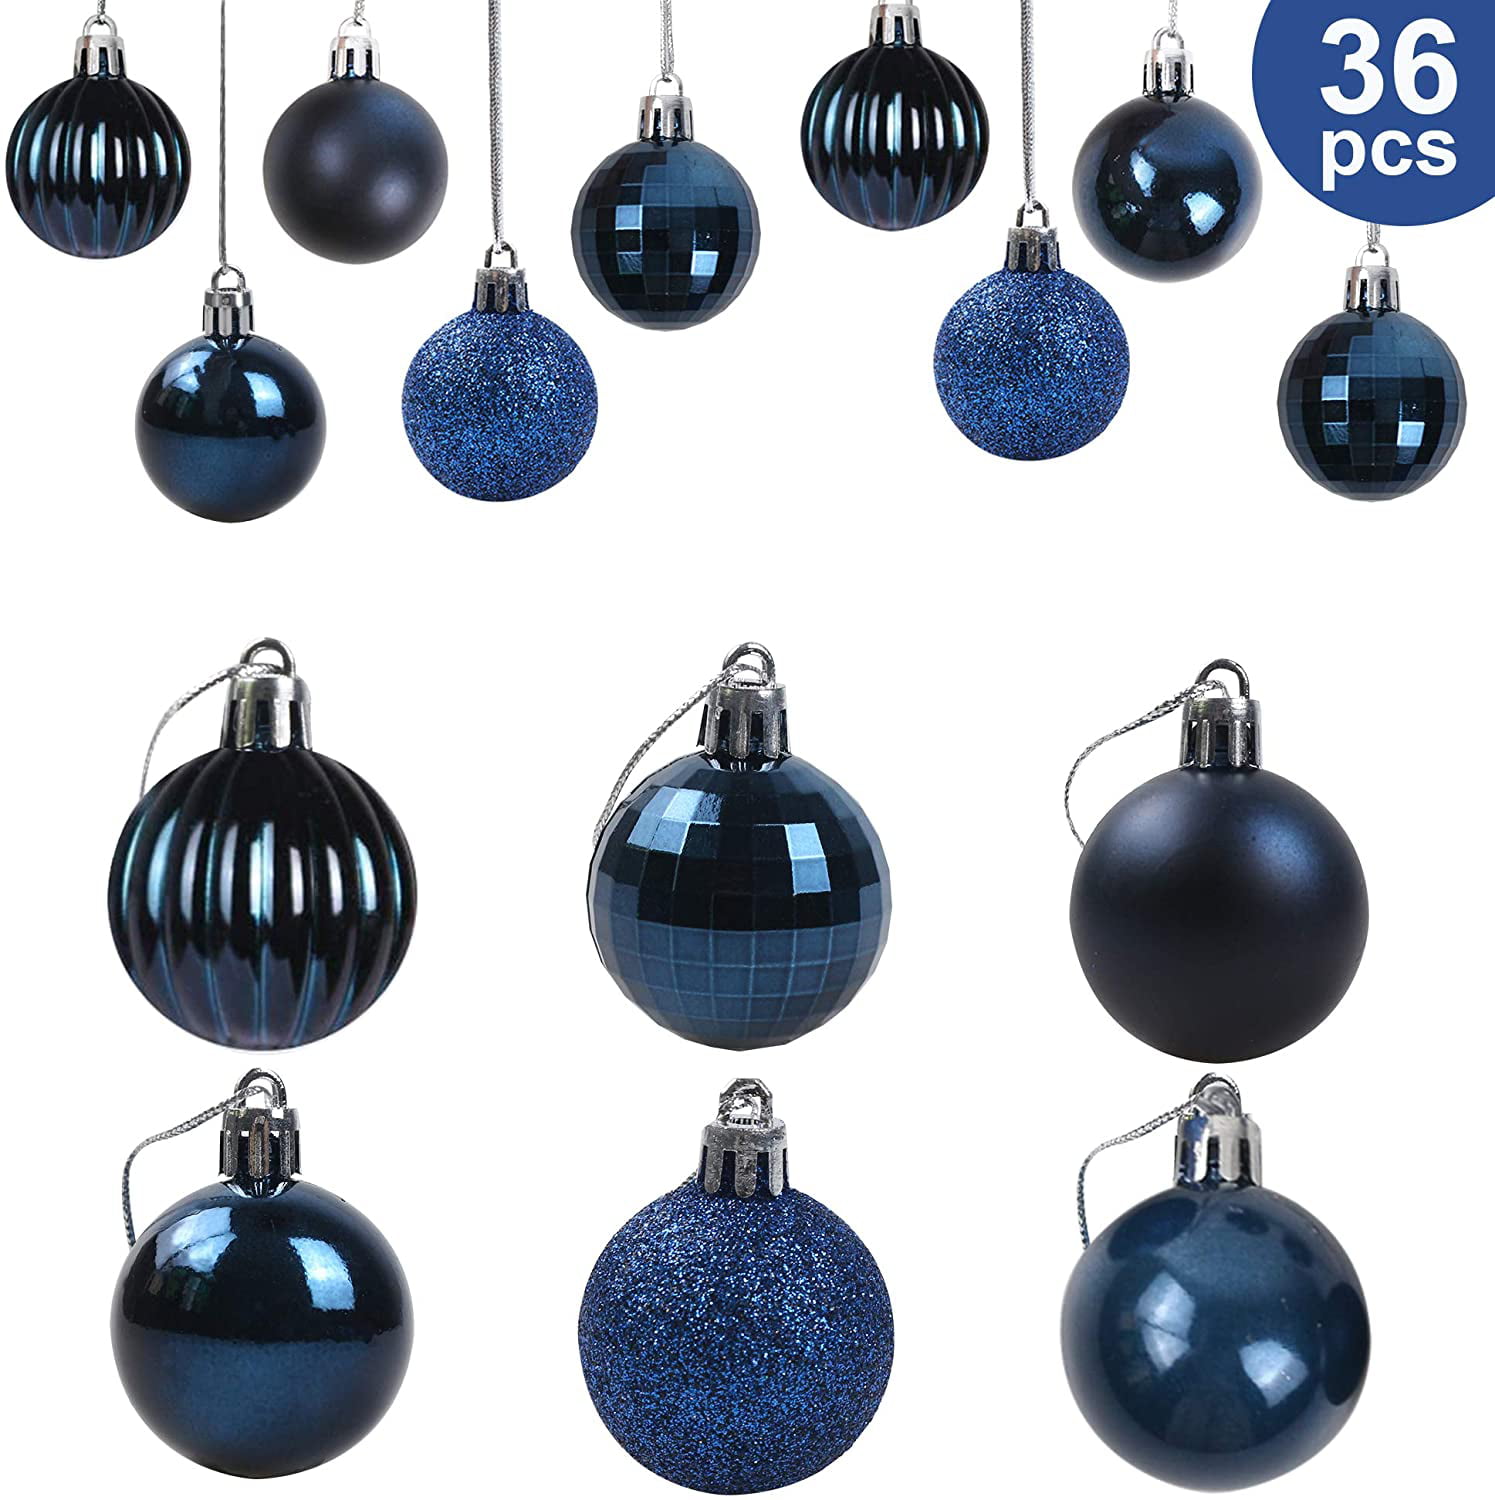 808 Set Of 6 White/Blue Egg Glass Christmas Tree Hanging Decorations Bauble 8cm 